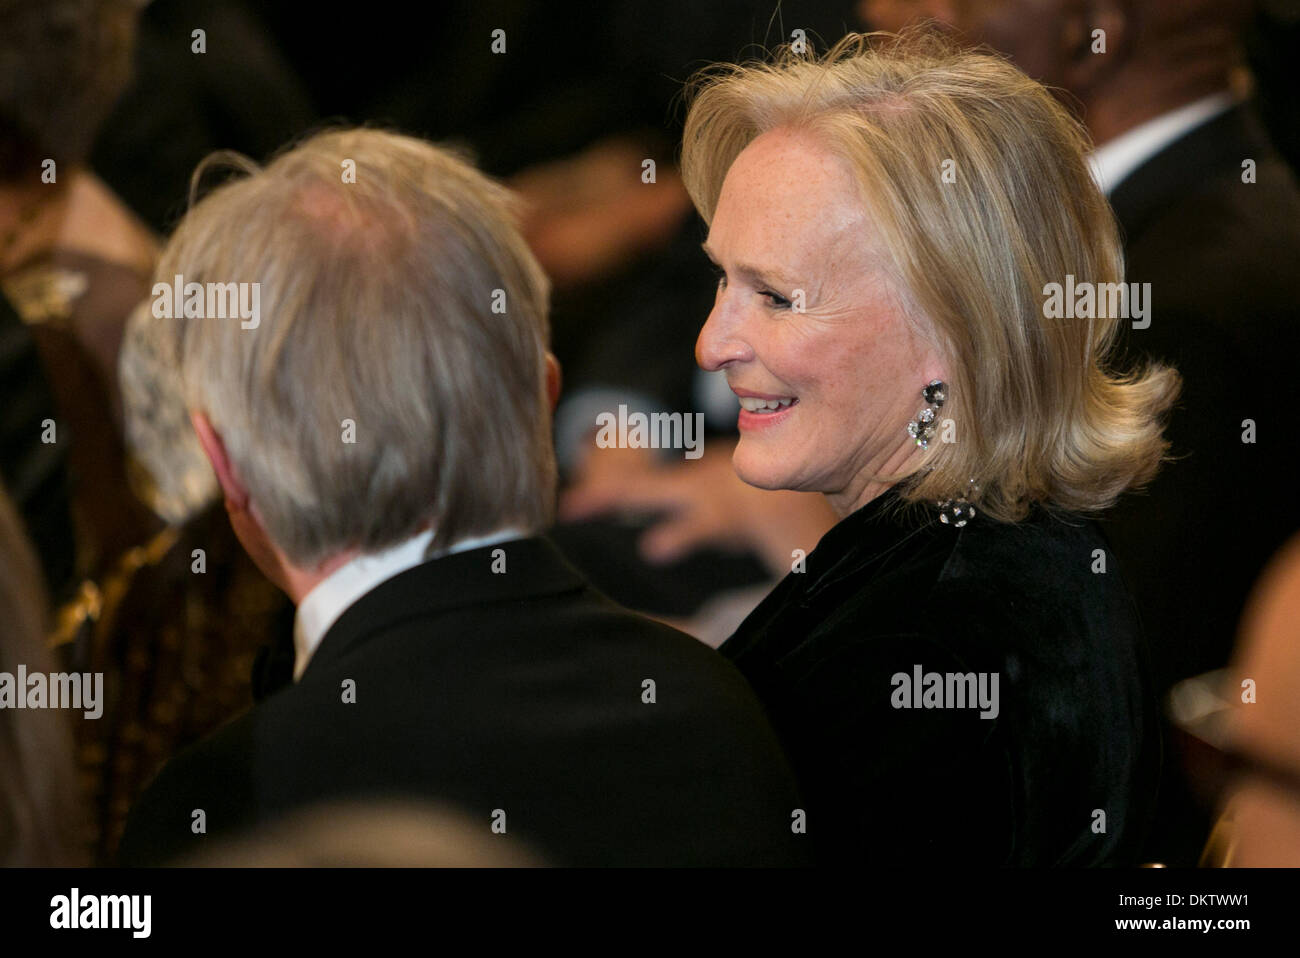 Washington, DC. 8th Dec, 2013. Actress Glenn Close and David Shaw attend a reception at the White House for the 2013 Kennedy Center Honorees on December 8, 2013 in Washington, DC. Credit: Kristoffer Tripplaar / Pool via CNP/dpa/Alamy Live News Stock Photo